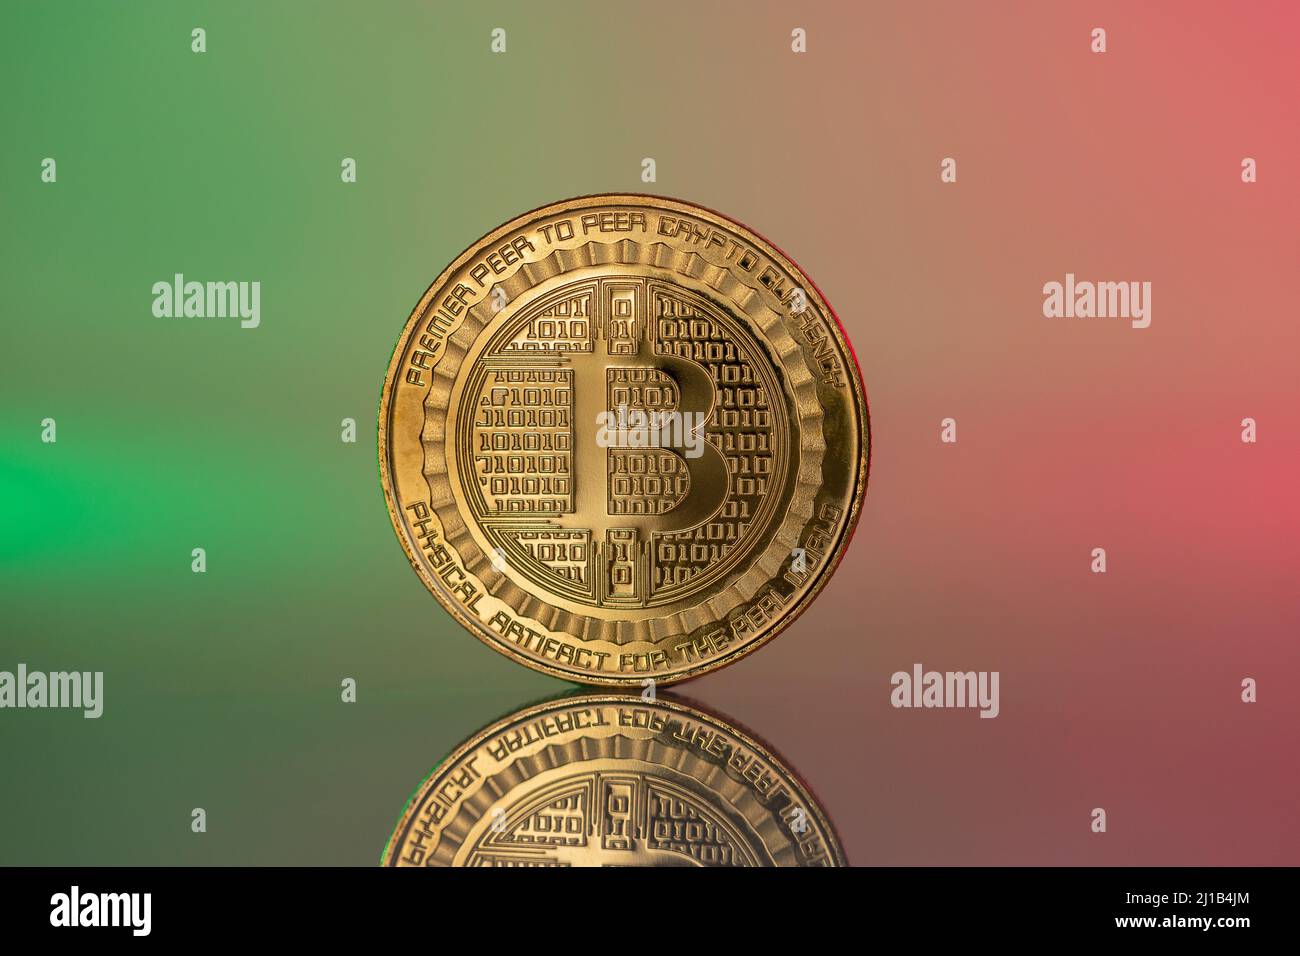 Bitcoin BTC cryptocurrency physical coin placed on the reflective surface and lit with green and red lights. Stock Photo